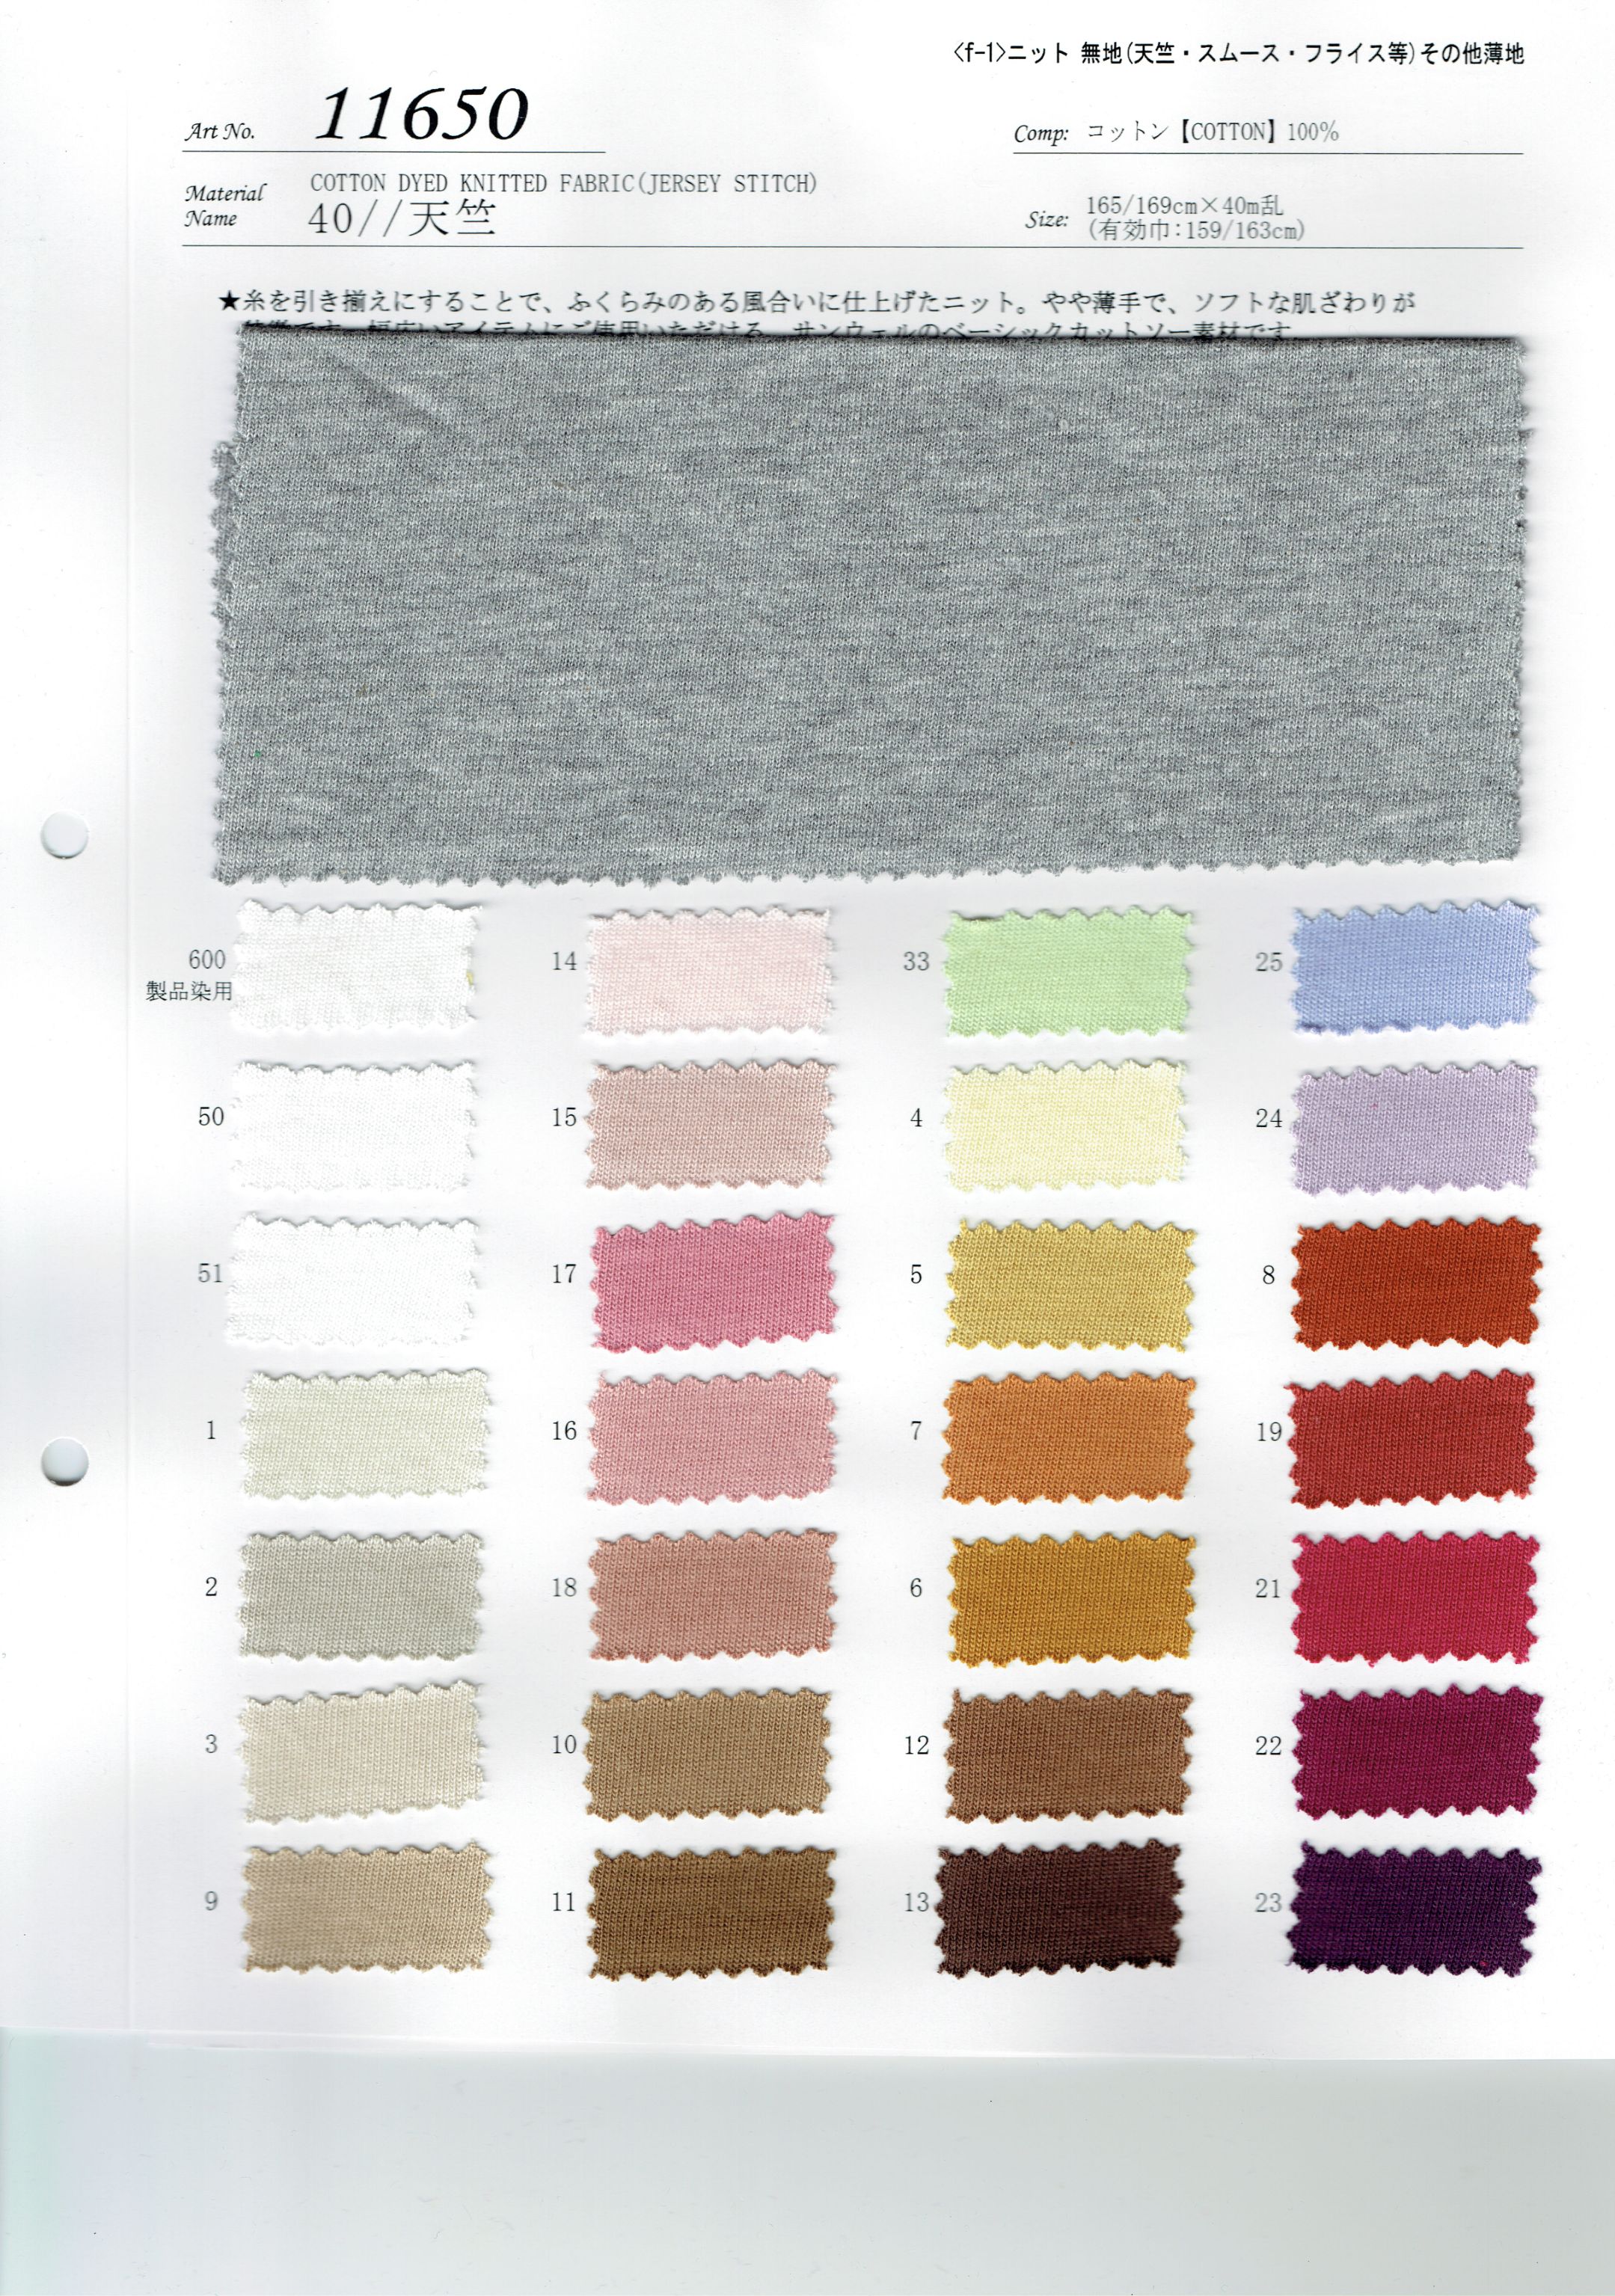 View COTTON100 DYED KNITTED FABRIC[JERSEY STITCH] DYED KNITTED FABRIC[JERSEY STITCH]